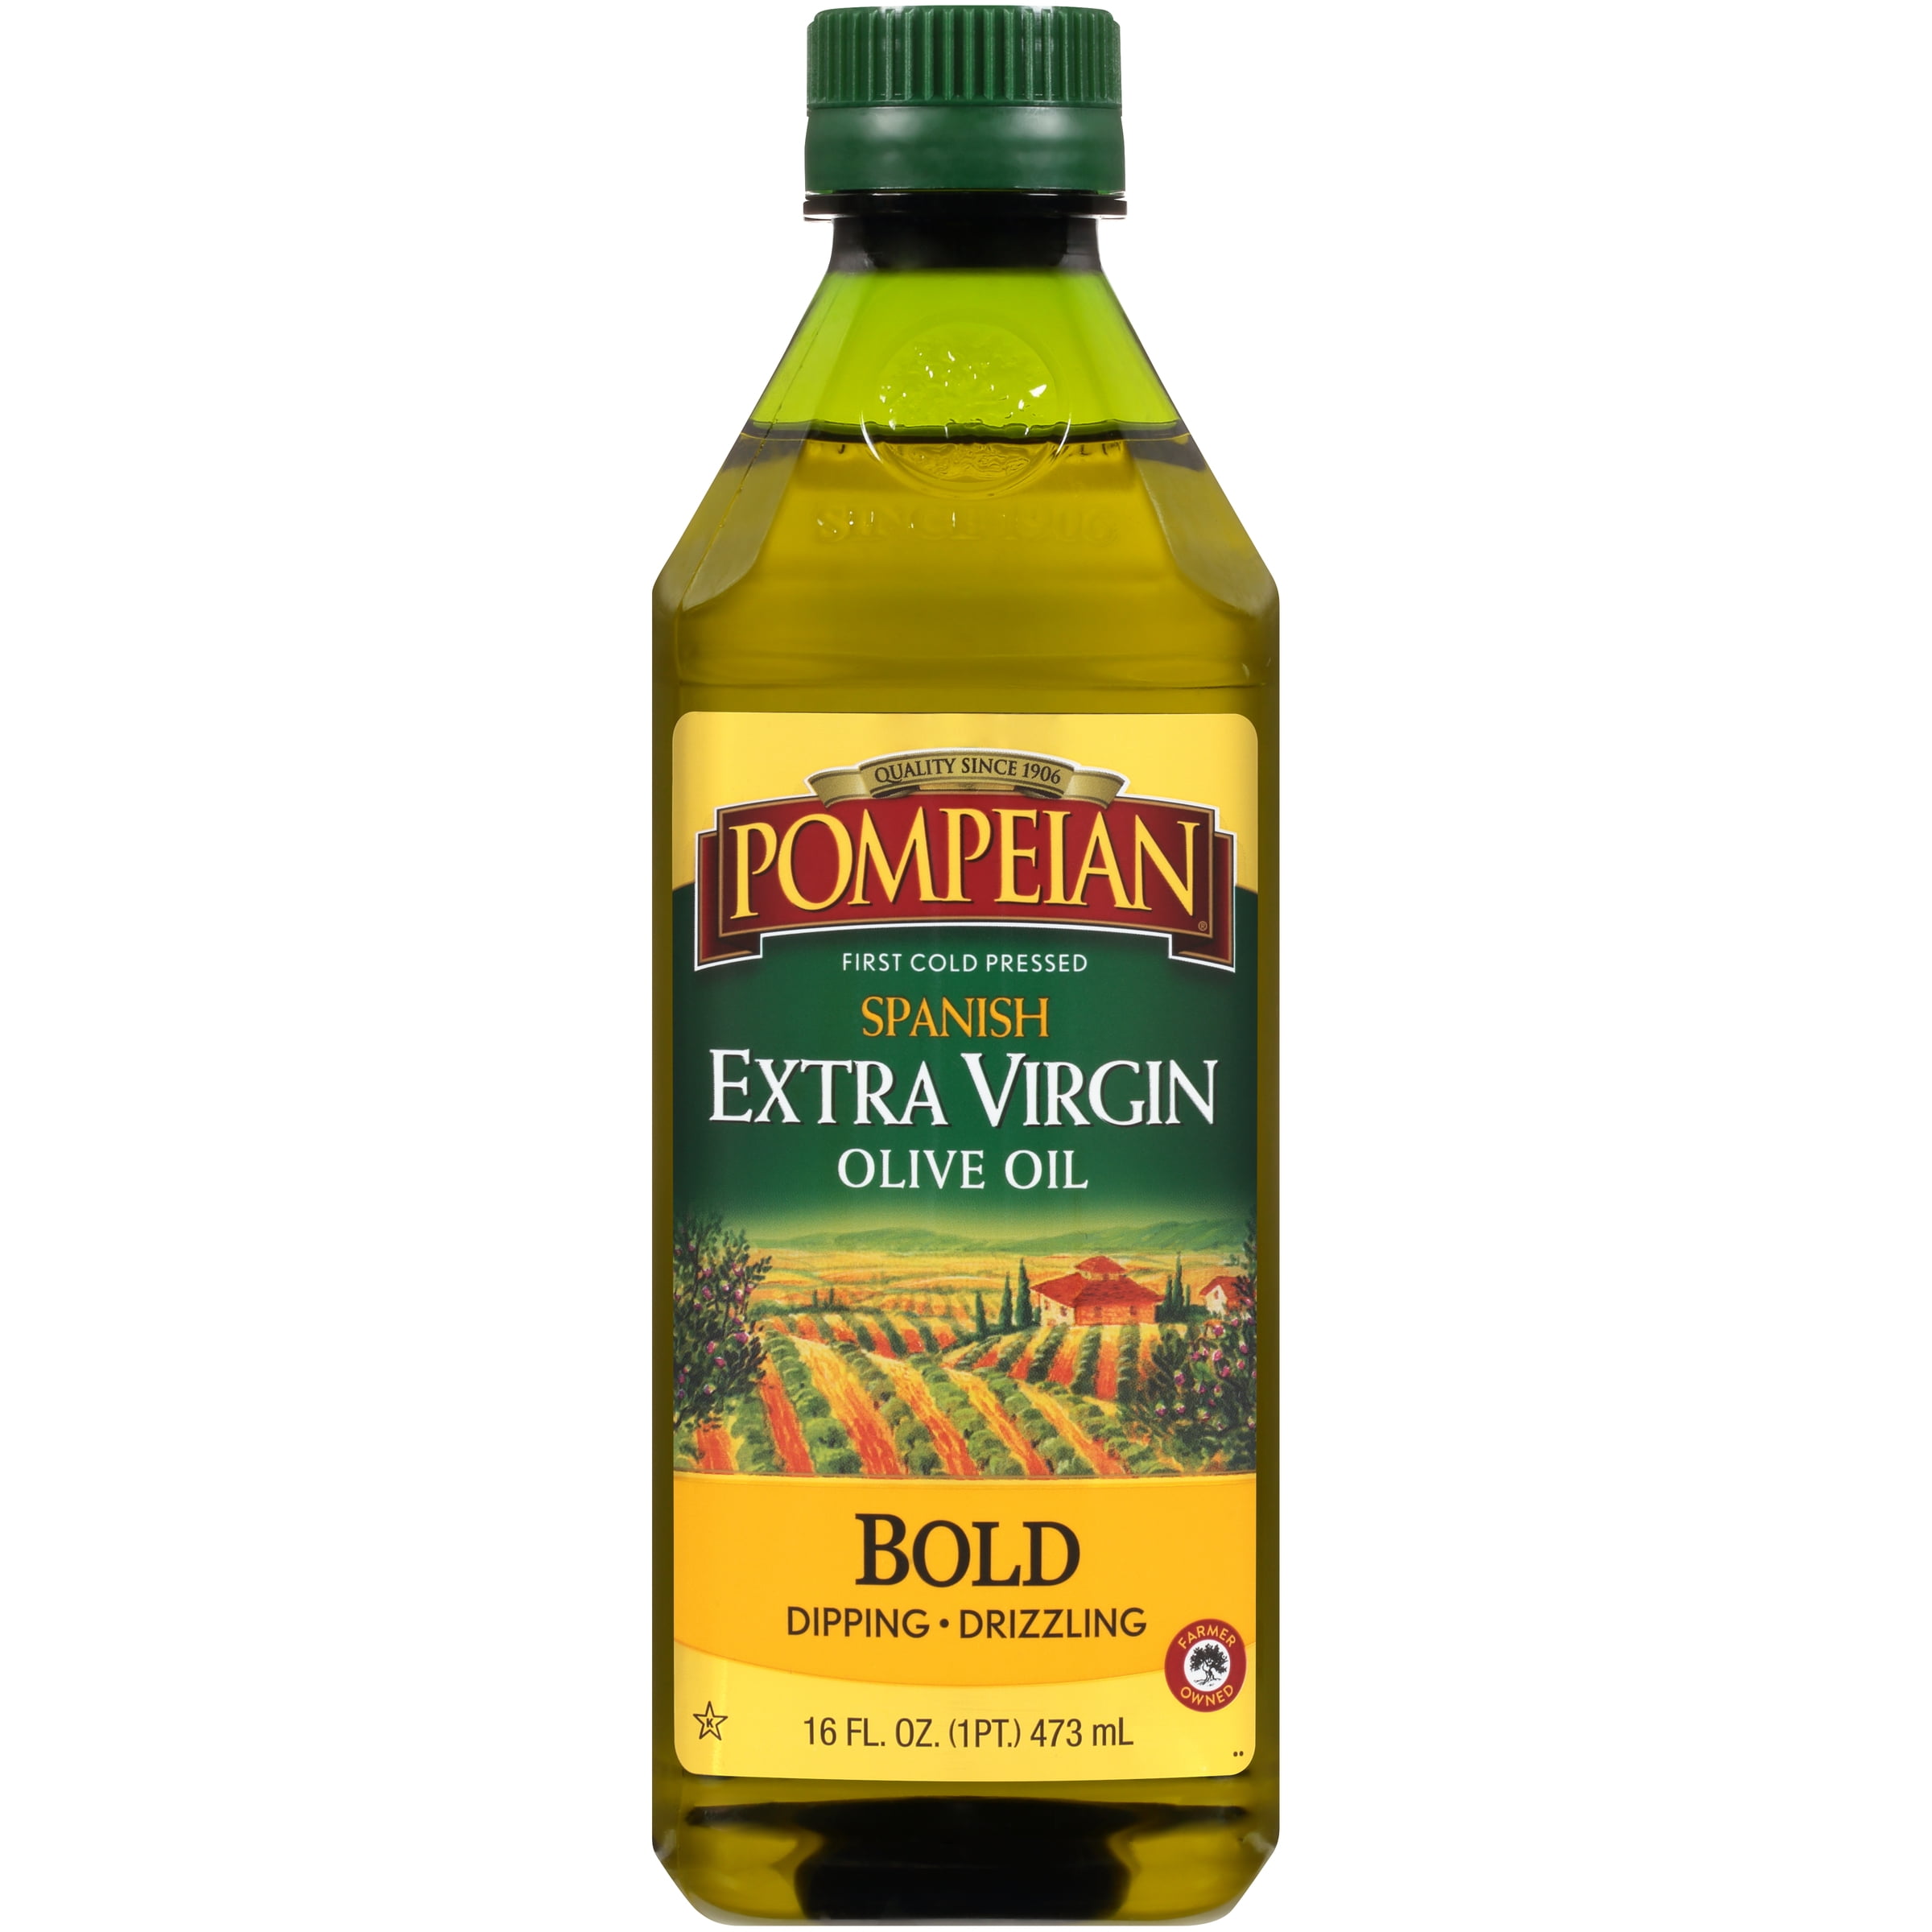 Pompeian Smooth Extra Virgin Olive Oil, First Cold Pressed, Mild And Delicate Flavor, Perfect For Sauteing And Stir